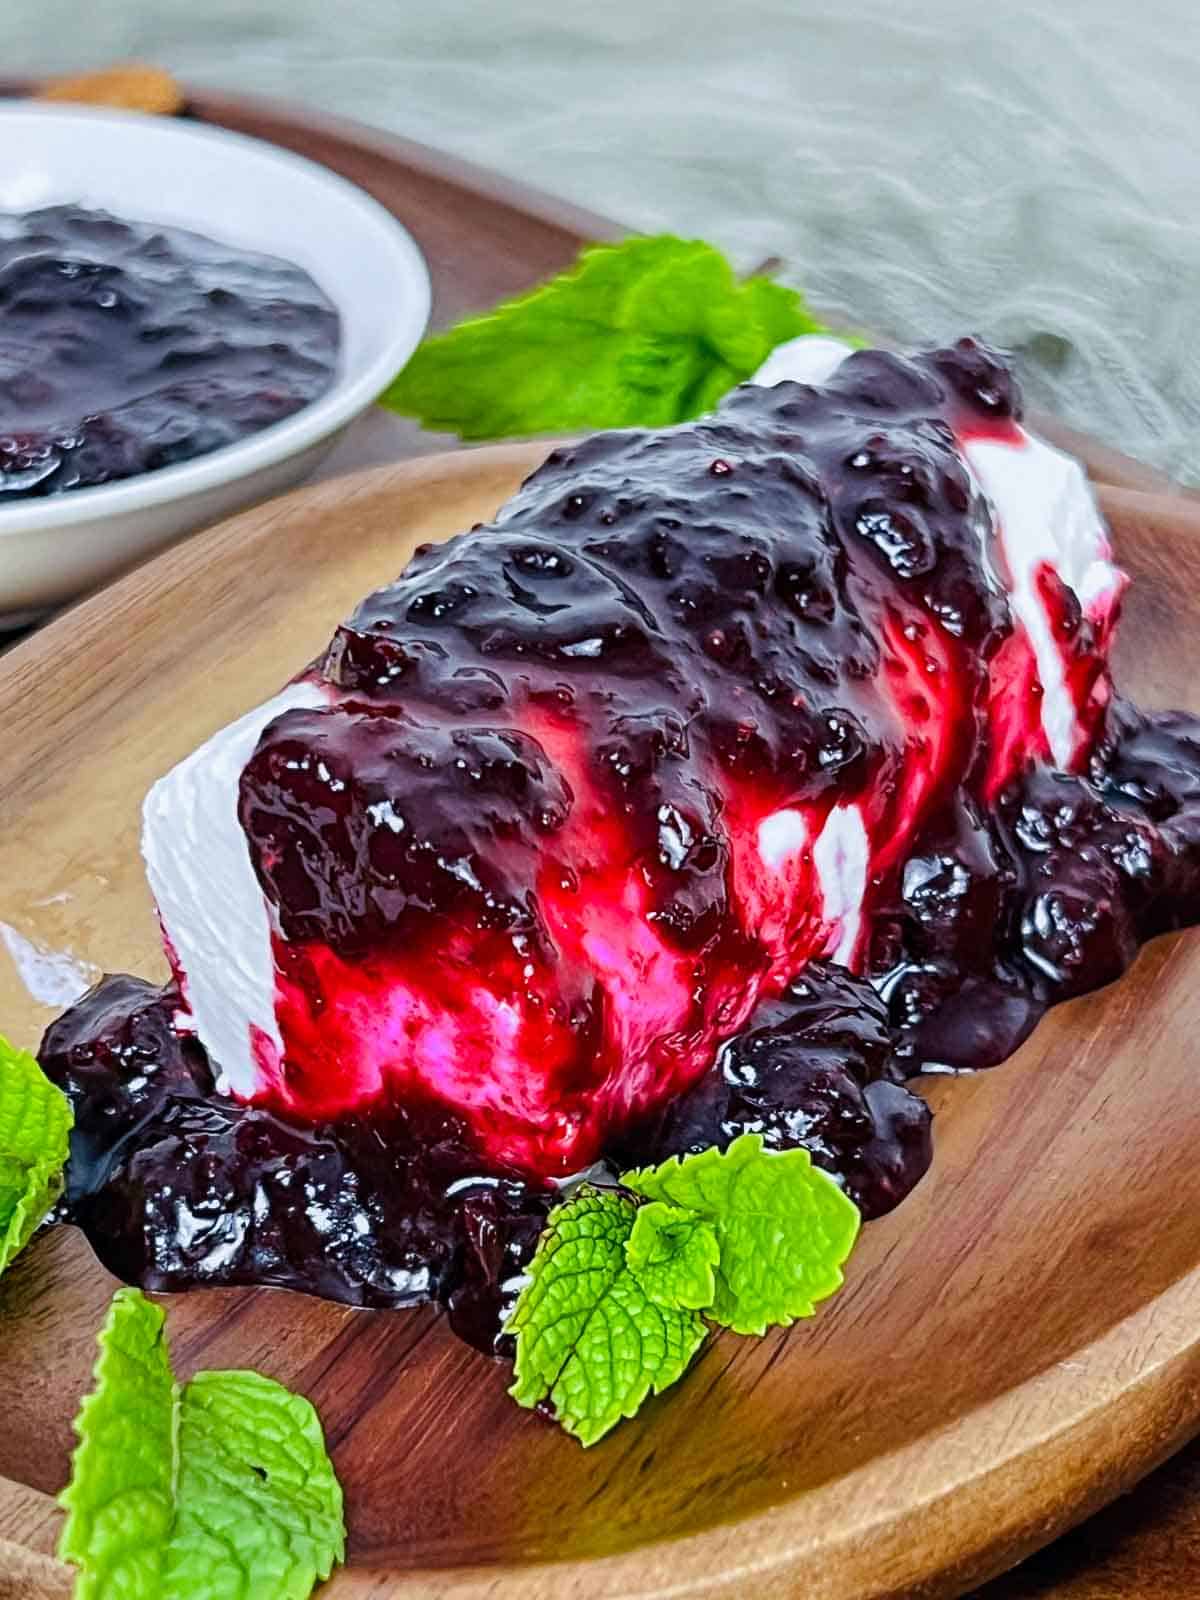 A goat cheese log placed on wooden board with blueberry chutney drizzled on top.